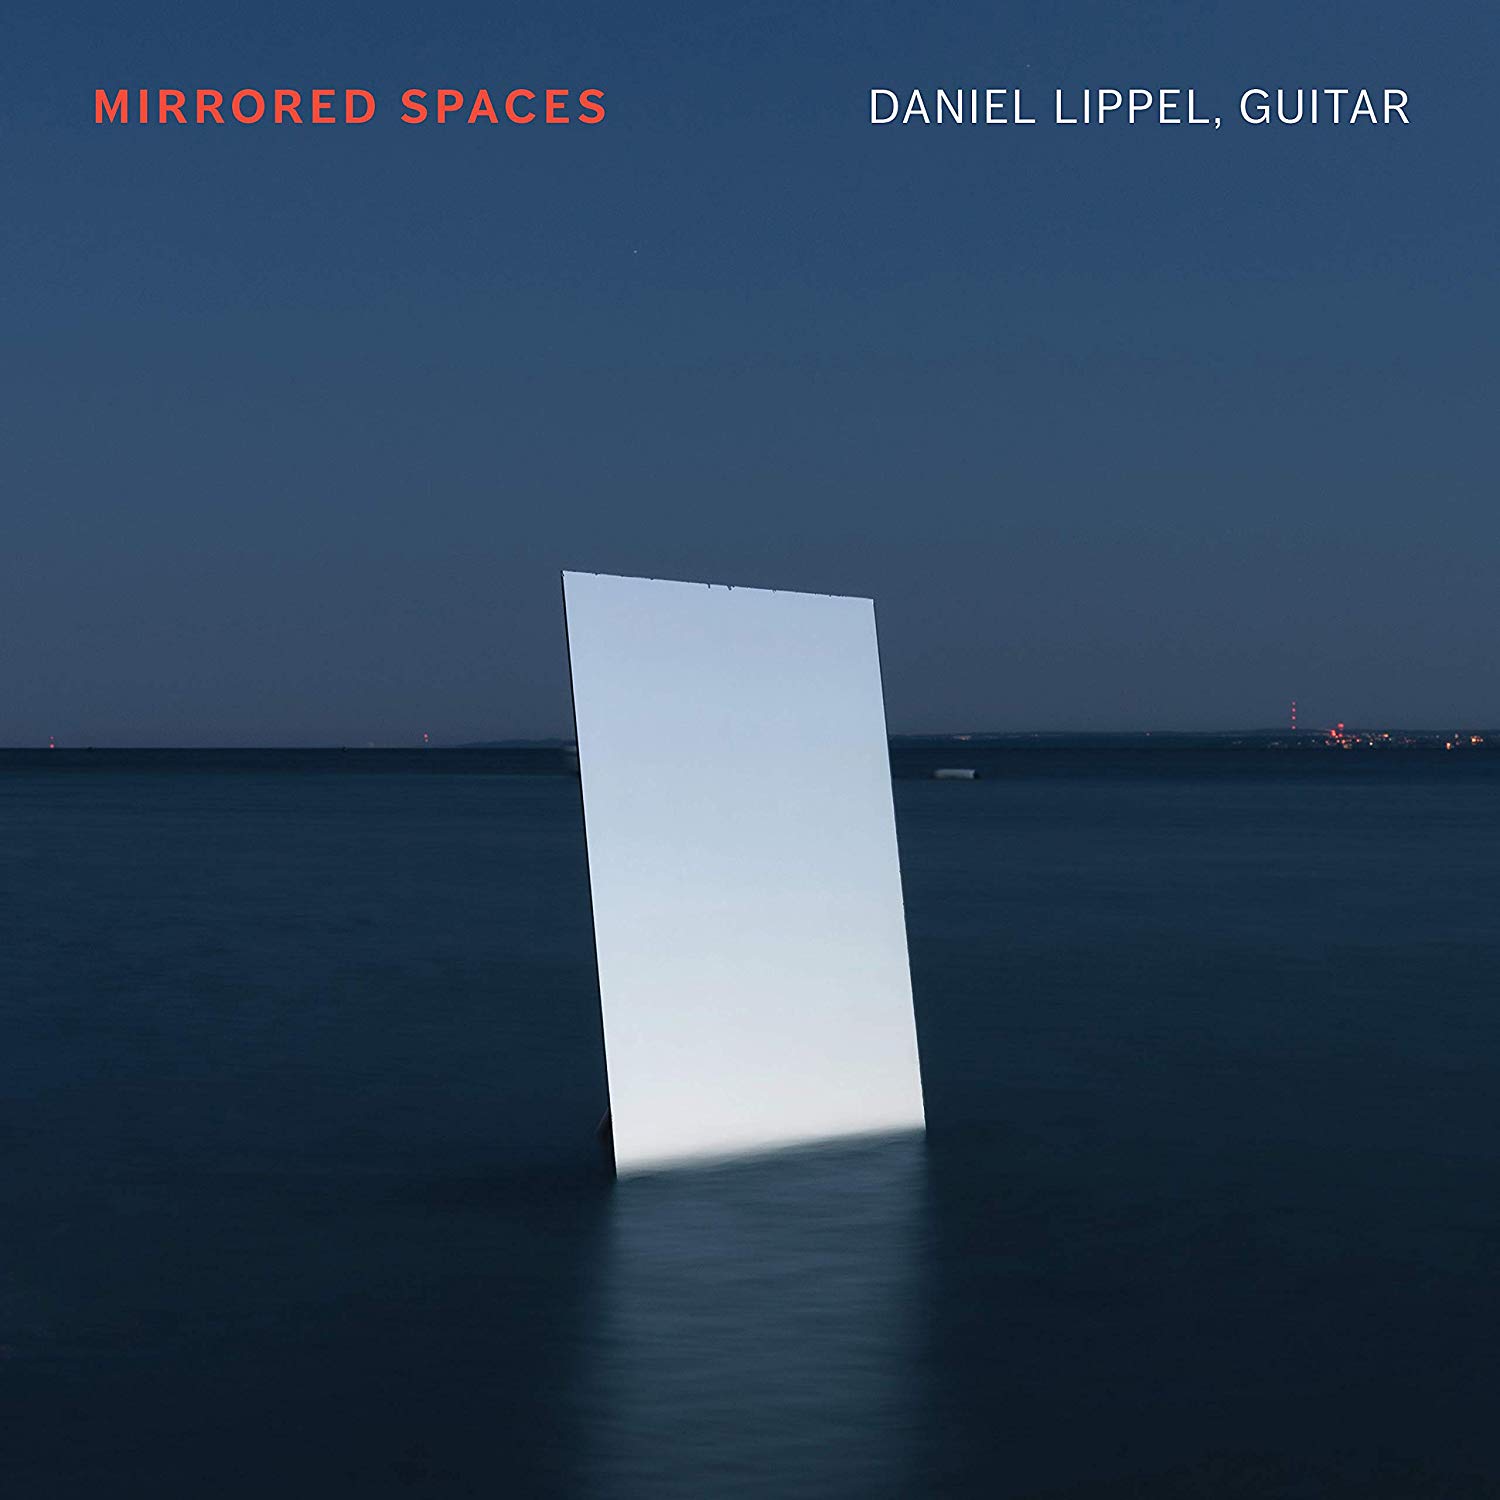 [Mirrored Spaces CD cover]